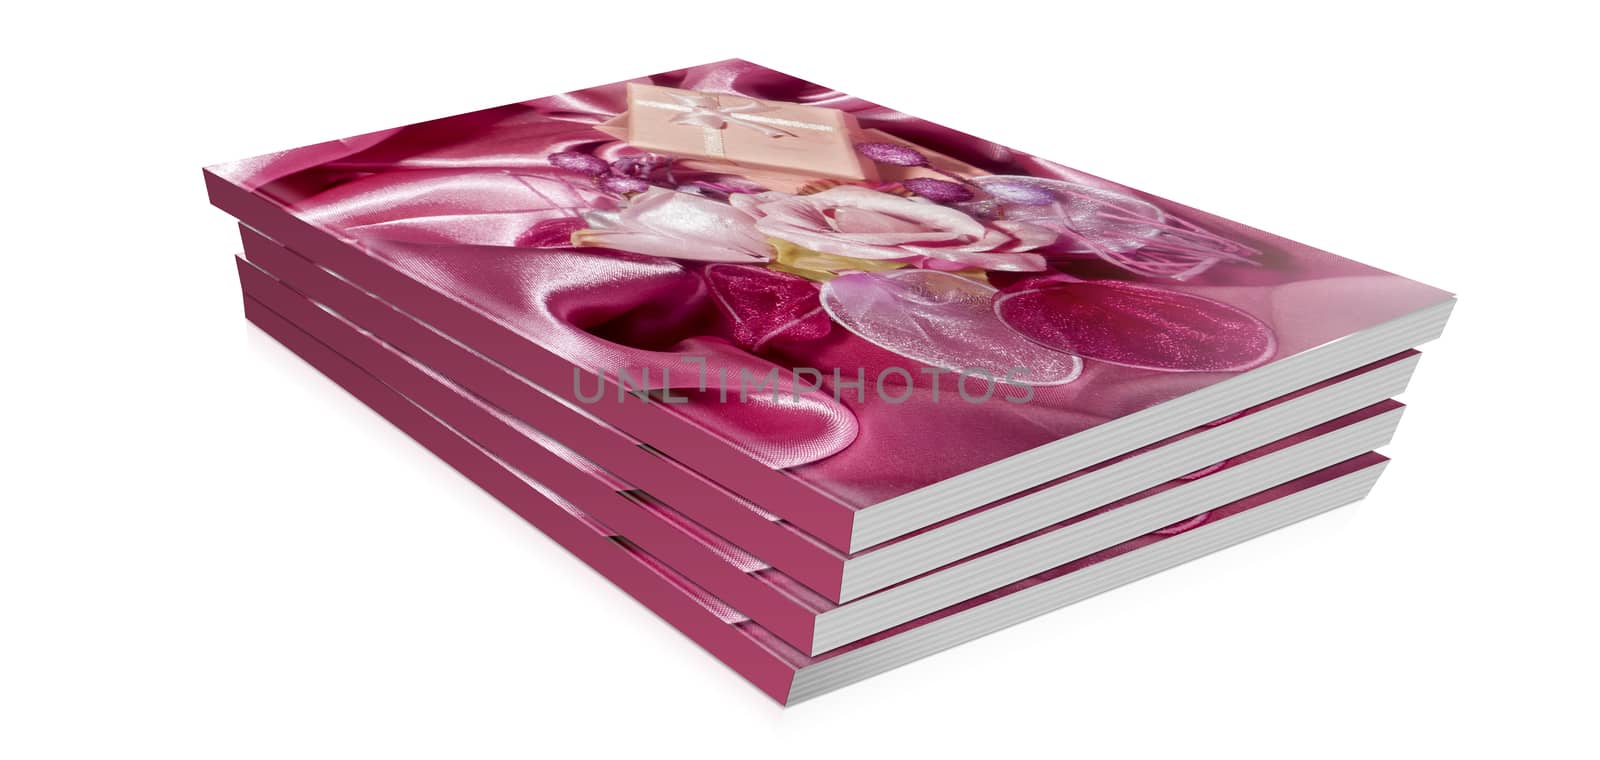 books of gift for valentine day on  a fabric  background 